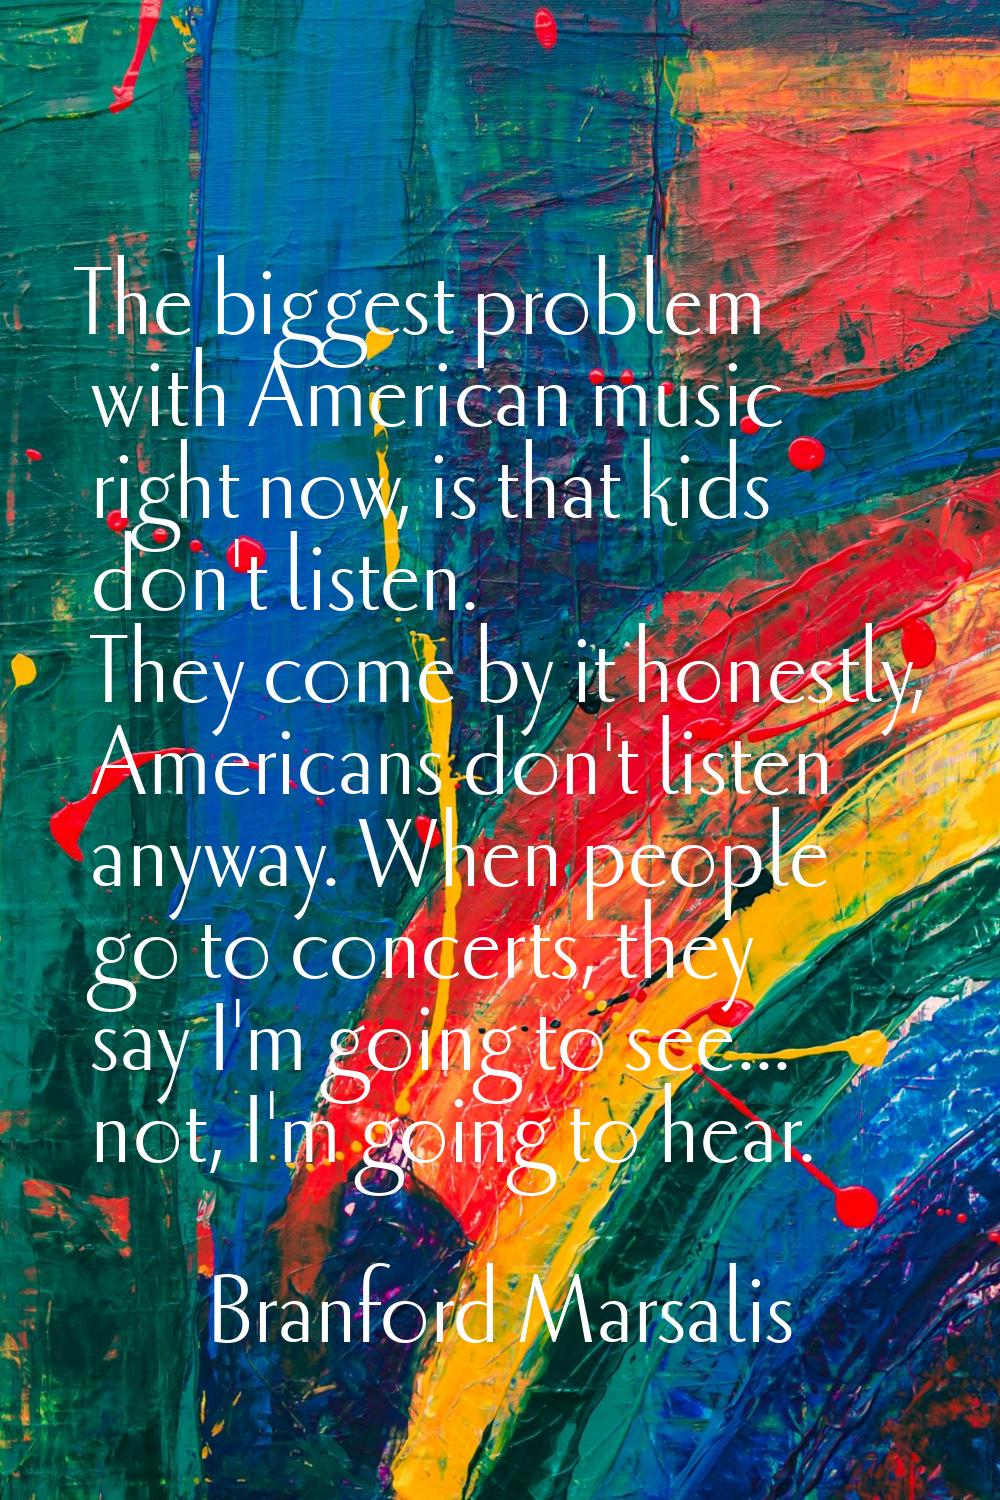 The biggest problem with American music right now, is that kids don't listen. They come by it hones